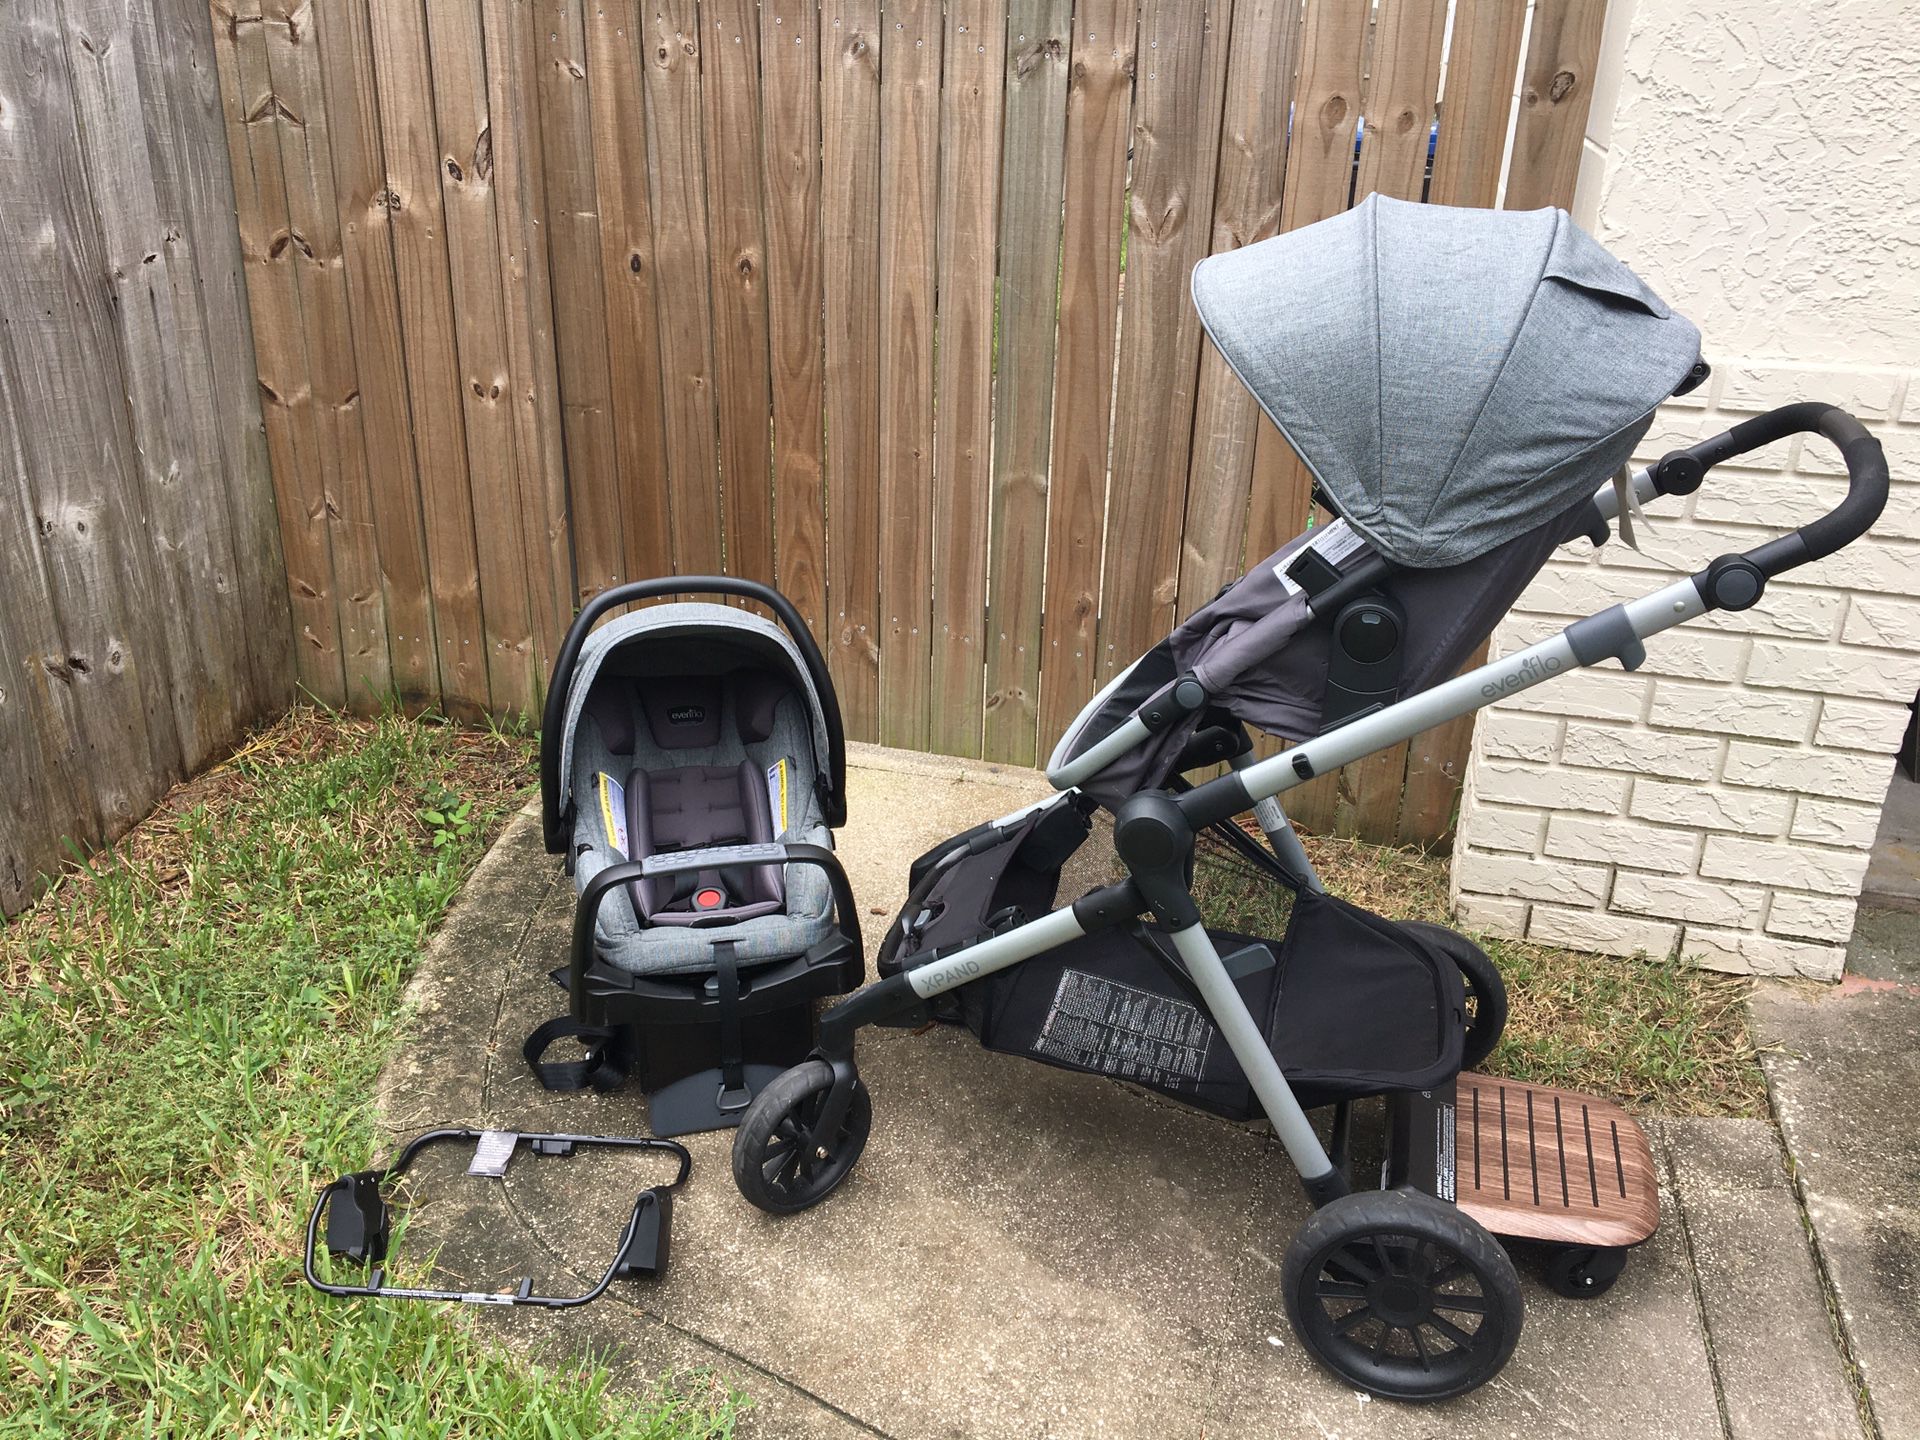 Evenflo Pivot Xpand double stroller with rider board